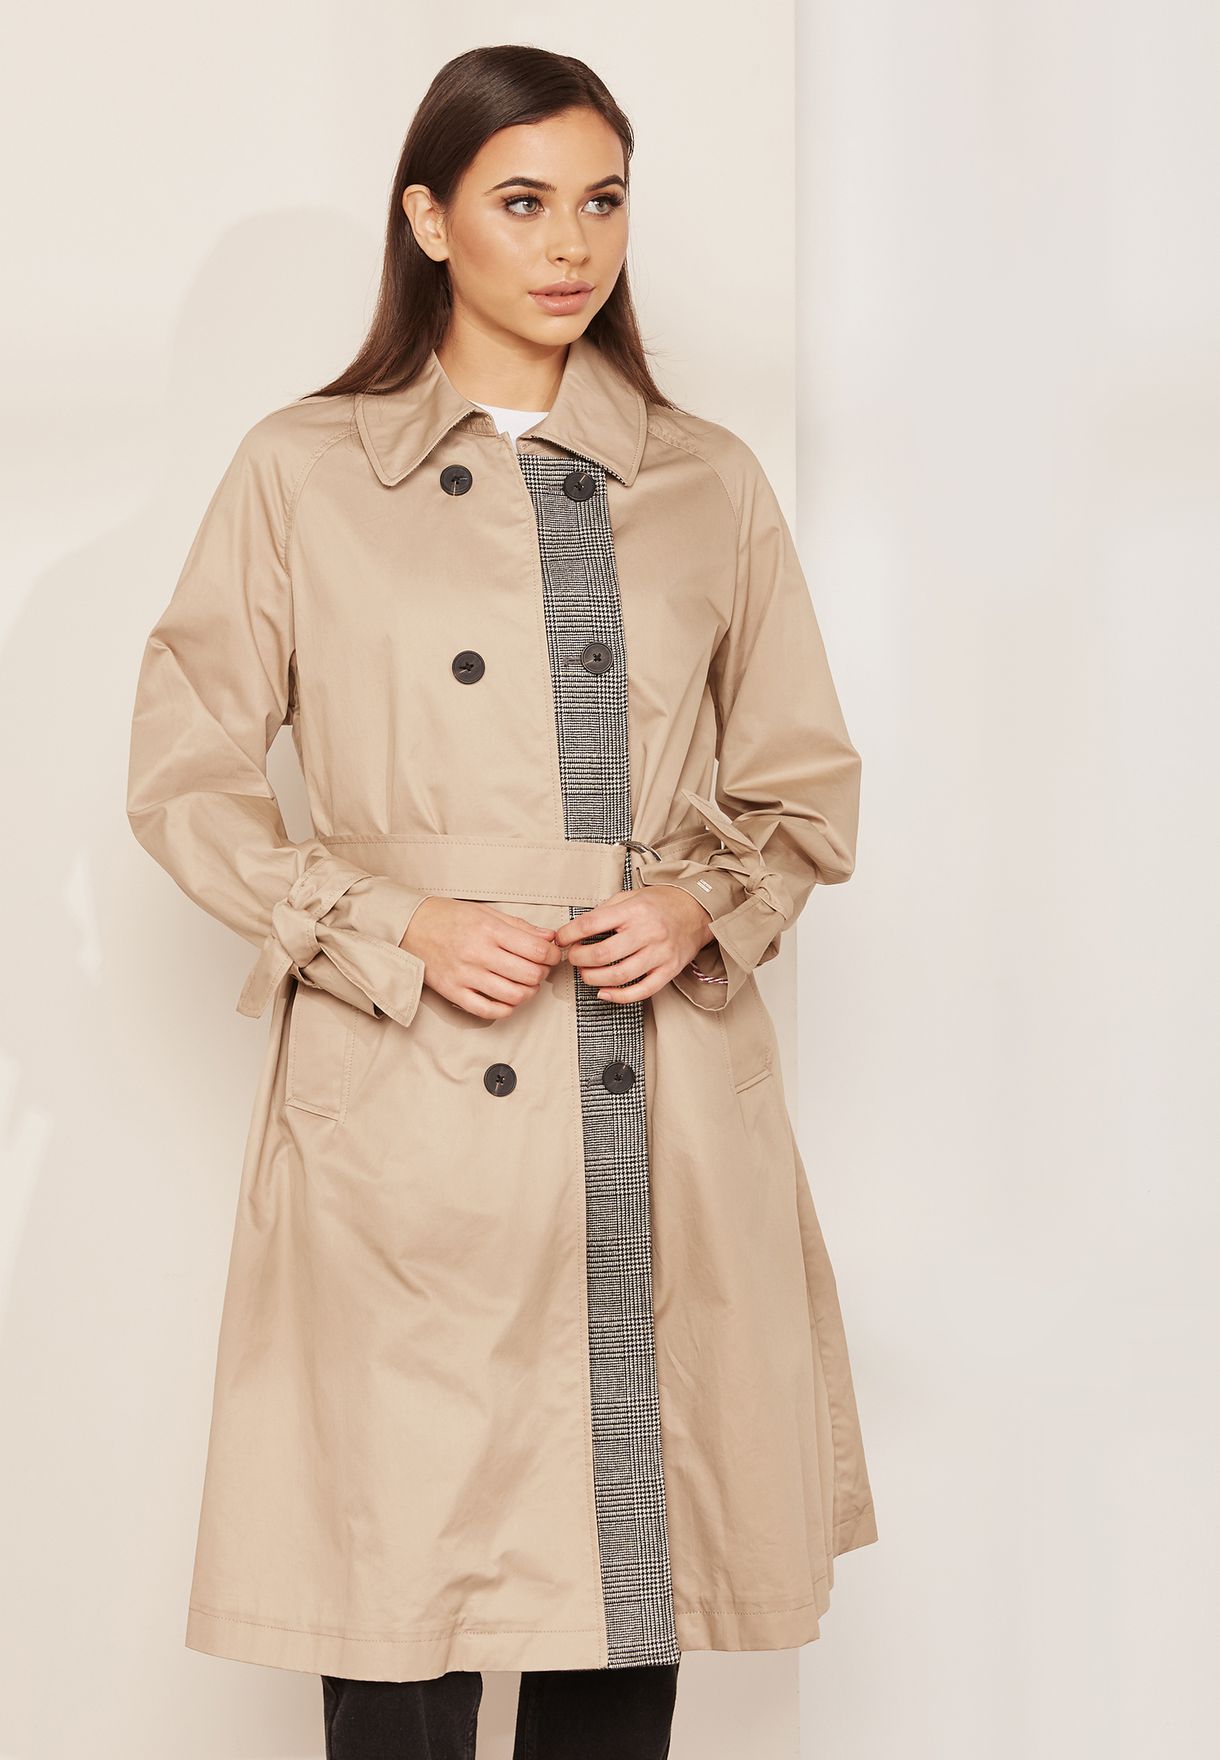 tommy hilfiger trench coat womens